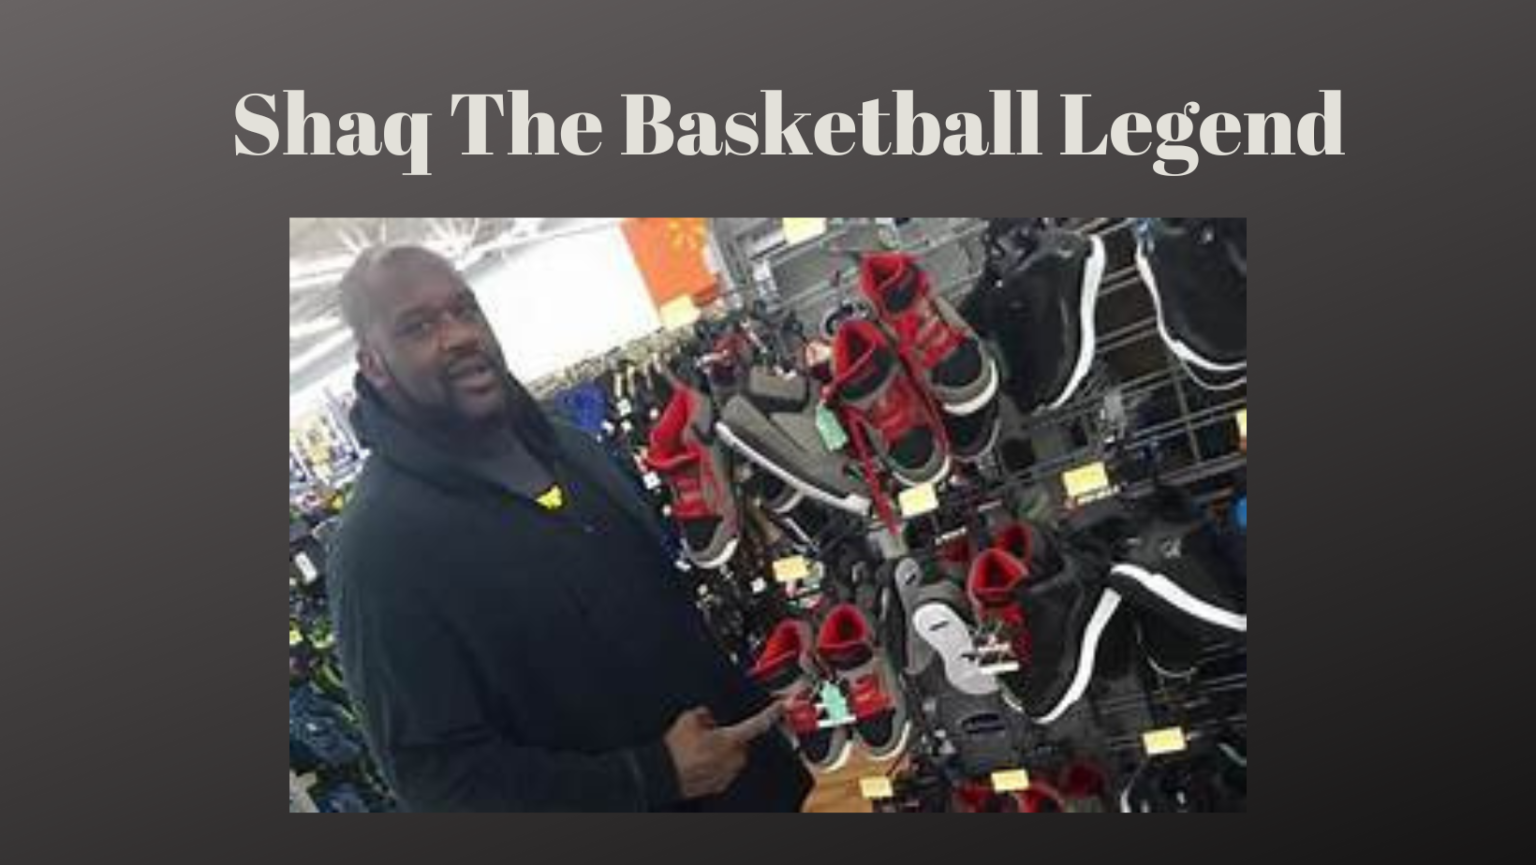 All about shaq height, weight and size